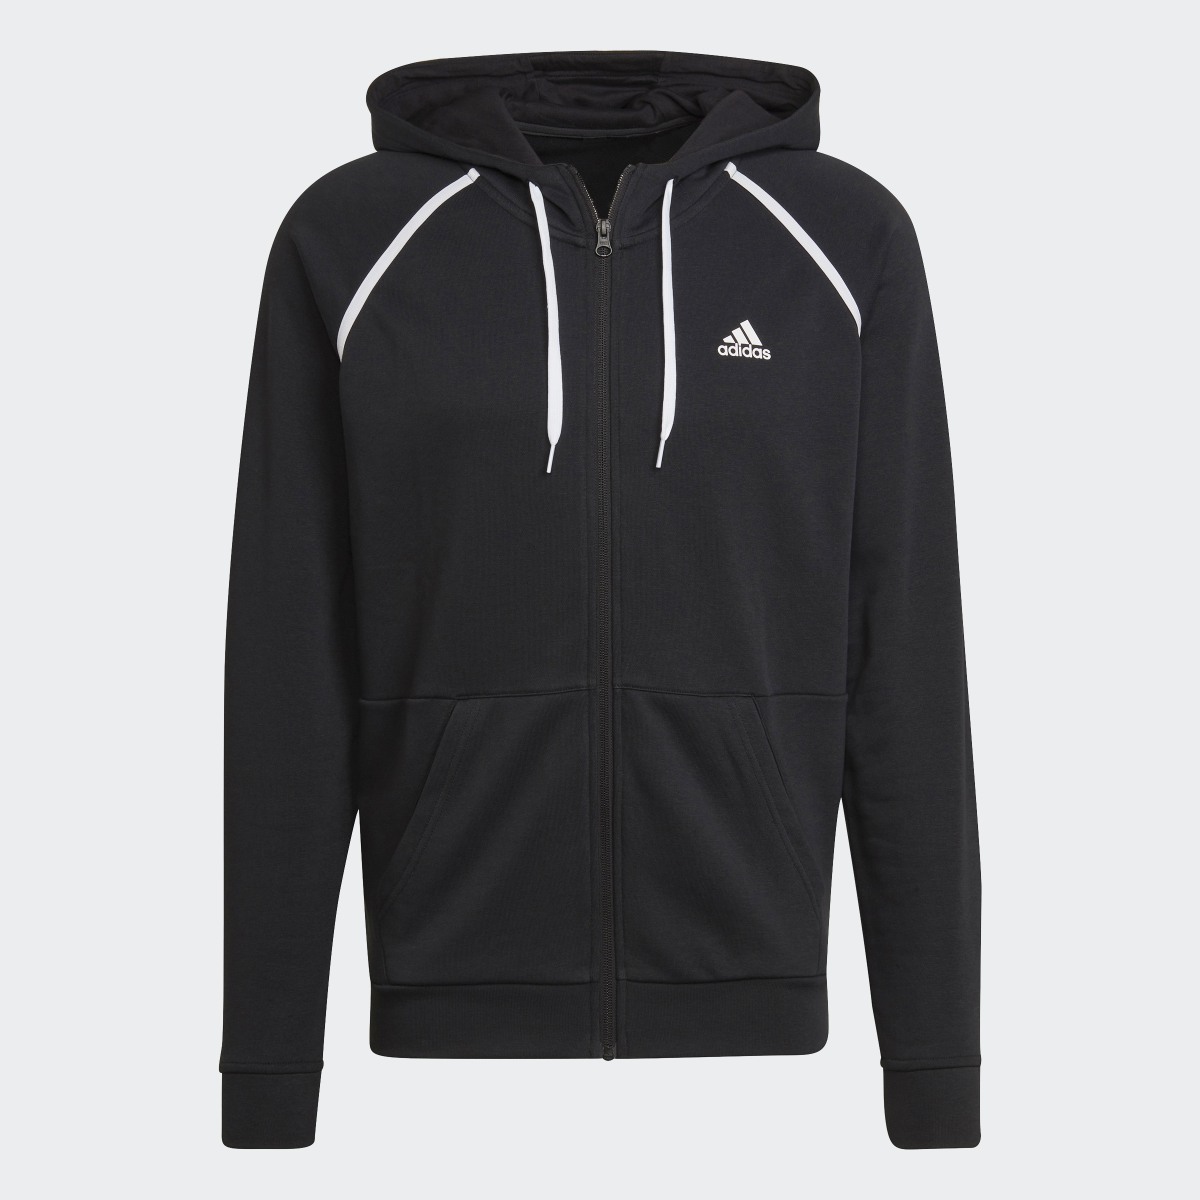 Adidas Cotton Piping Track Suit. 6